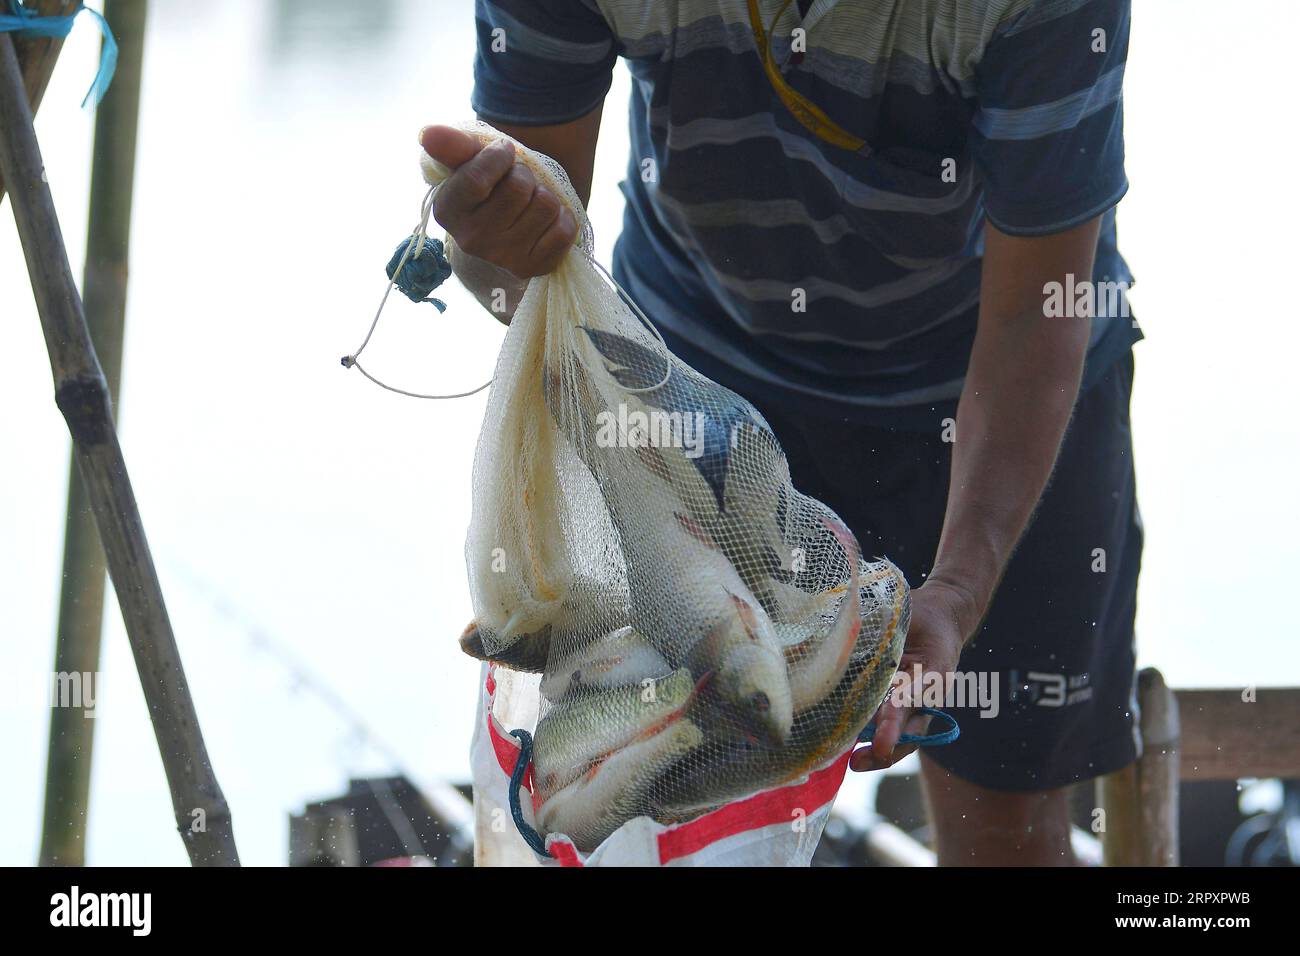 https://c8.alamy.com/comp/2RPXPWB/200531-tripura-may-31-2020-an-angler-packs-fish-on-the-opening-day-of-fishing-season-in-the-outskirts-of-agartala-tripura-india-may-31-2020-strxinhua-india-tripura-fishing-season-stringer-publicationxnotxinxchn-2RPXPWB.jpg